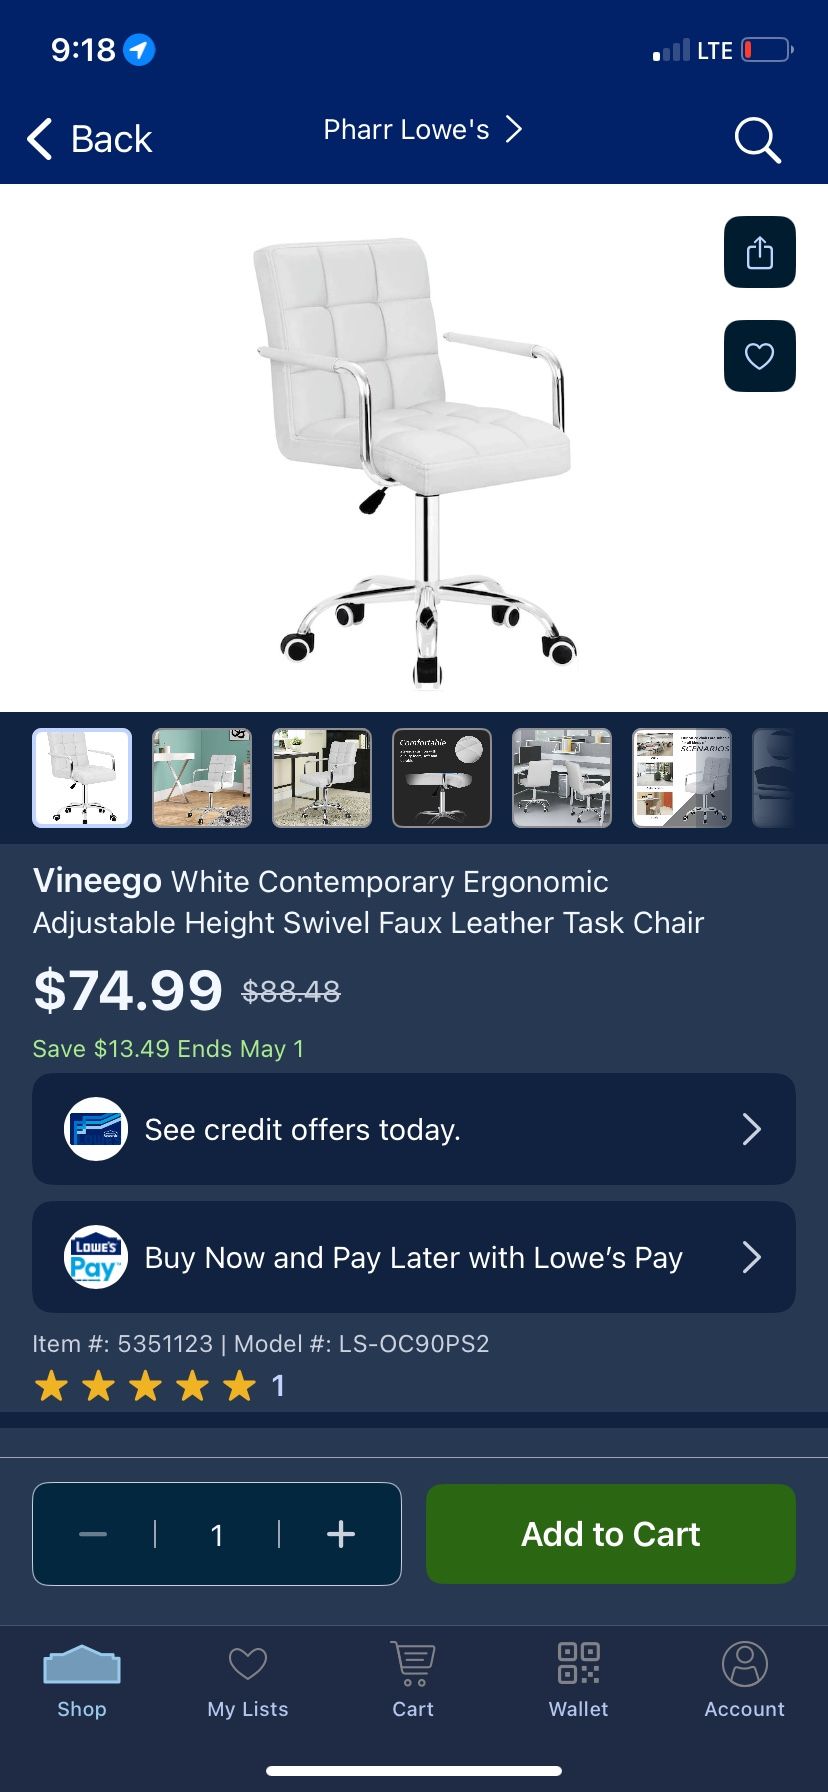 Vineego WHITE ADJUSTABLE HEIGHT SWIVEL FAUX LEATHER CHAIR 